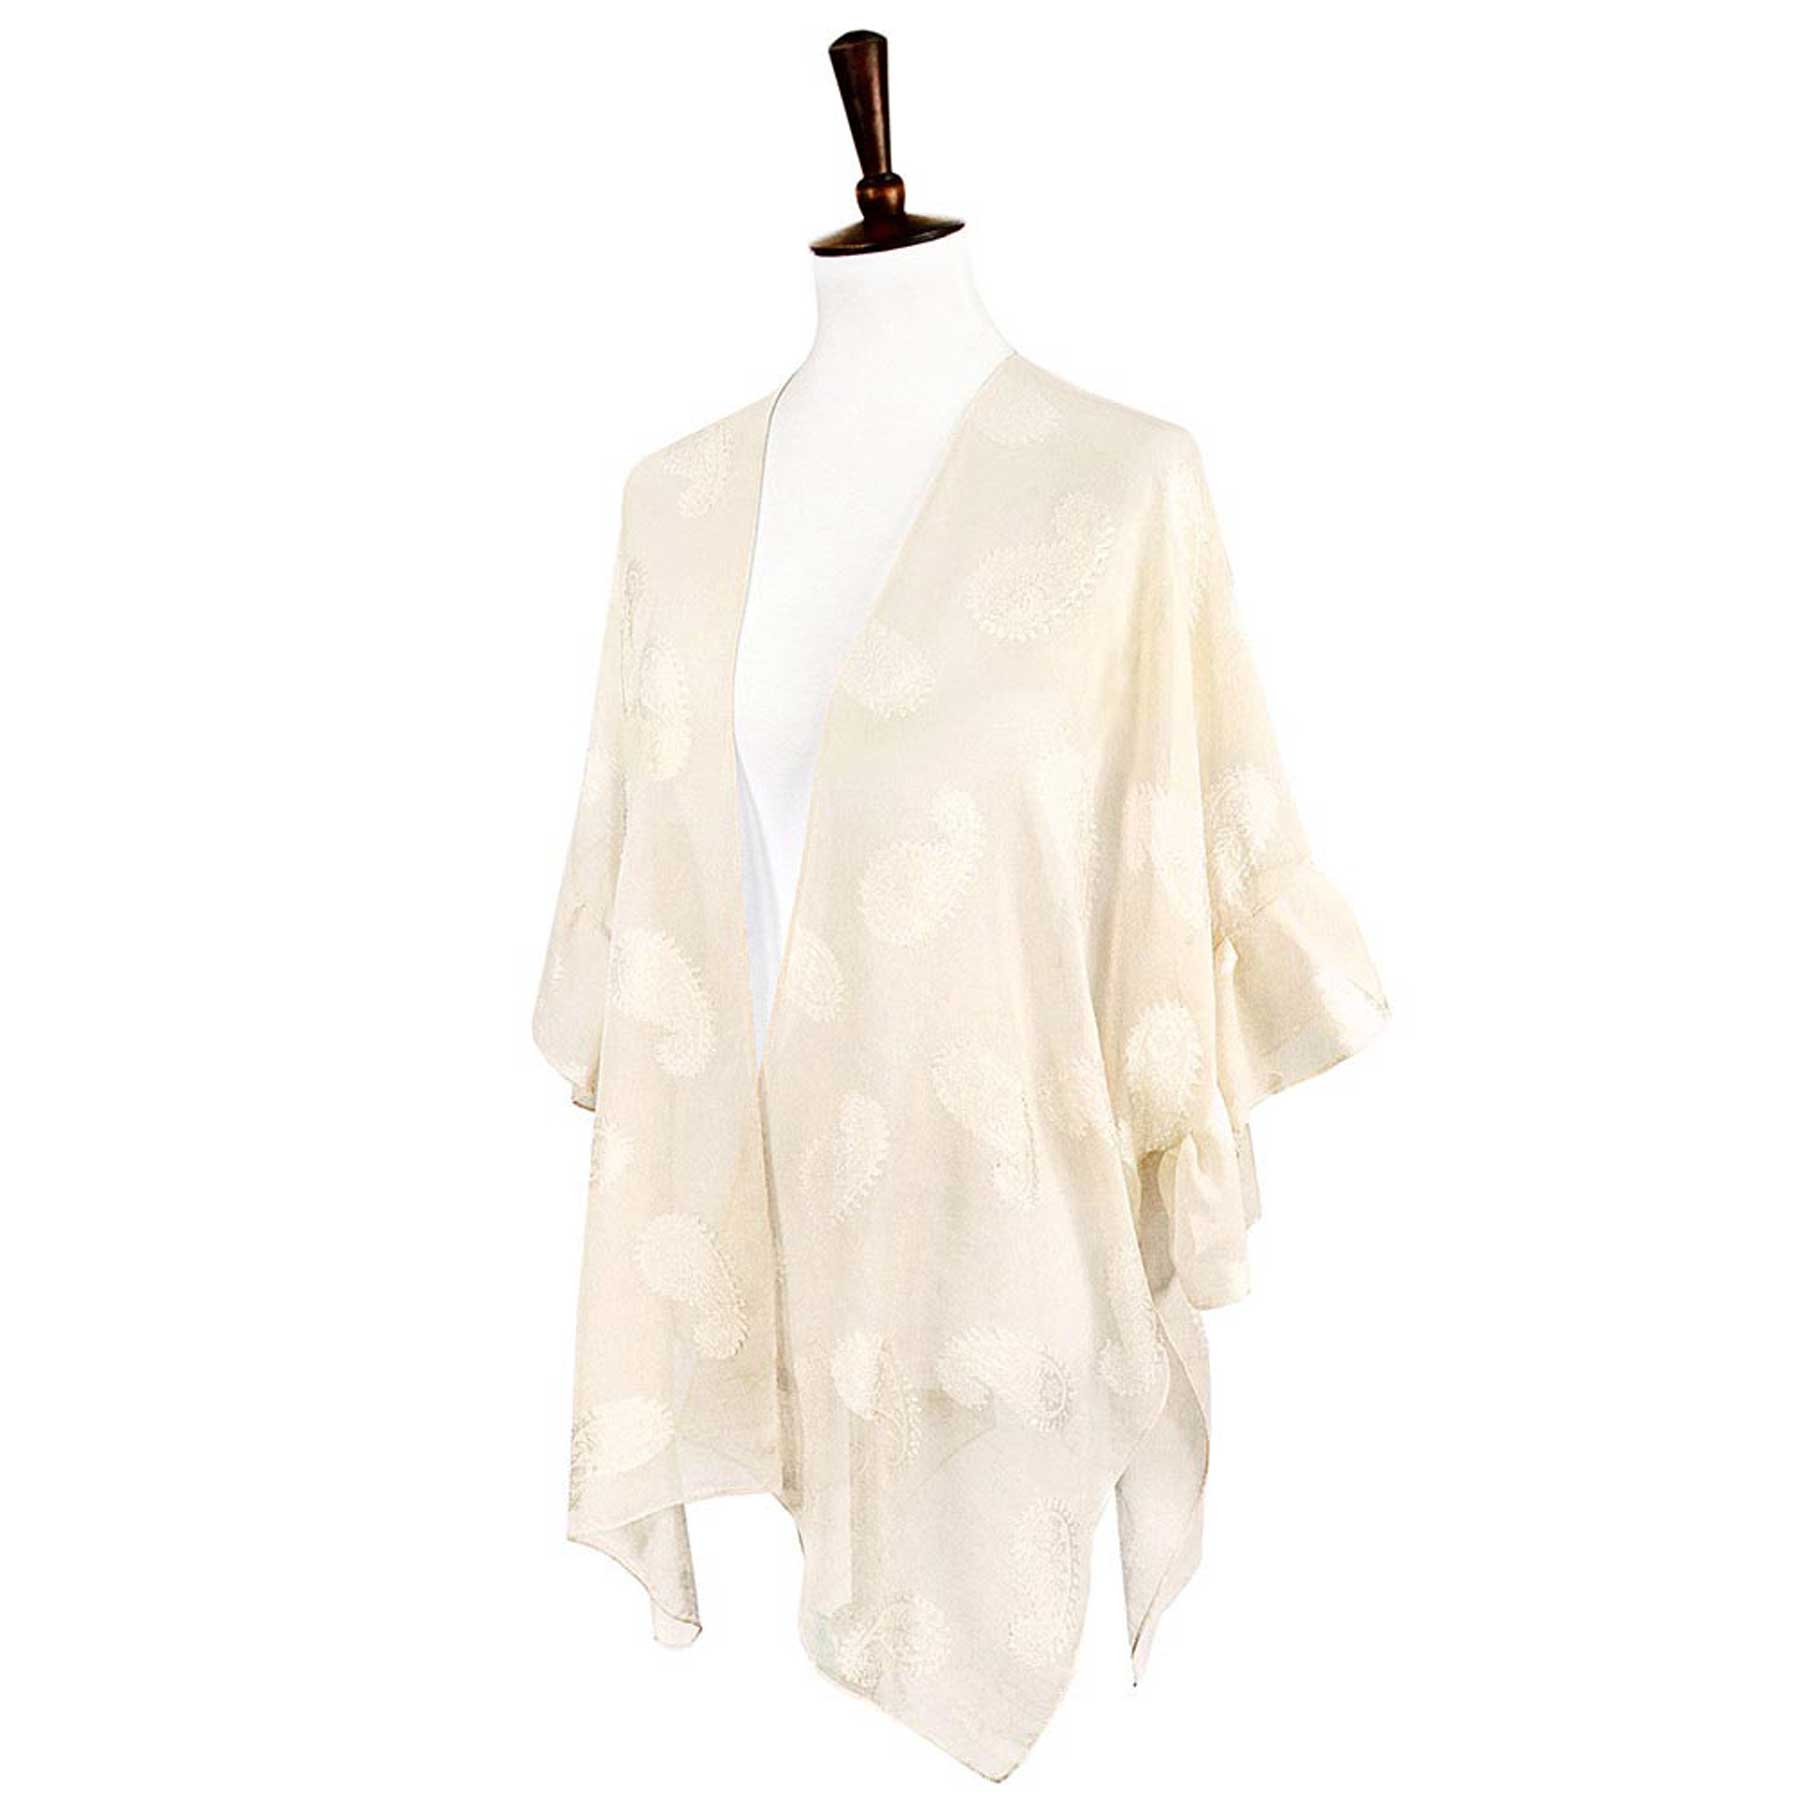 Ivory Paisley Patterned Sheer Ruffle Sleeves Cover Up Kimono Poncho, The lightweight Kimono poncho top is made of soft and breathable Polyester material. short sleeve swimsuit cover up with open front design, simple basic style, easy to put on and down. Perfect Gift for Wife, Mom, Birthday, Holiday, Anniversary, Fun Night O